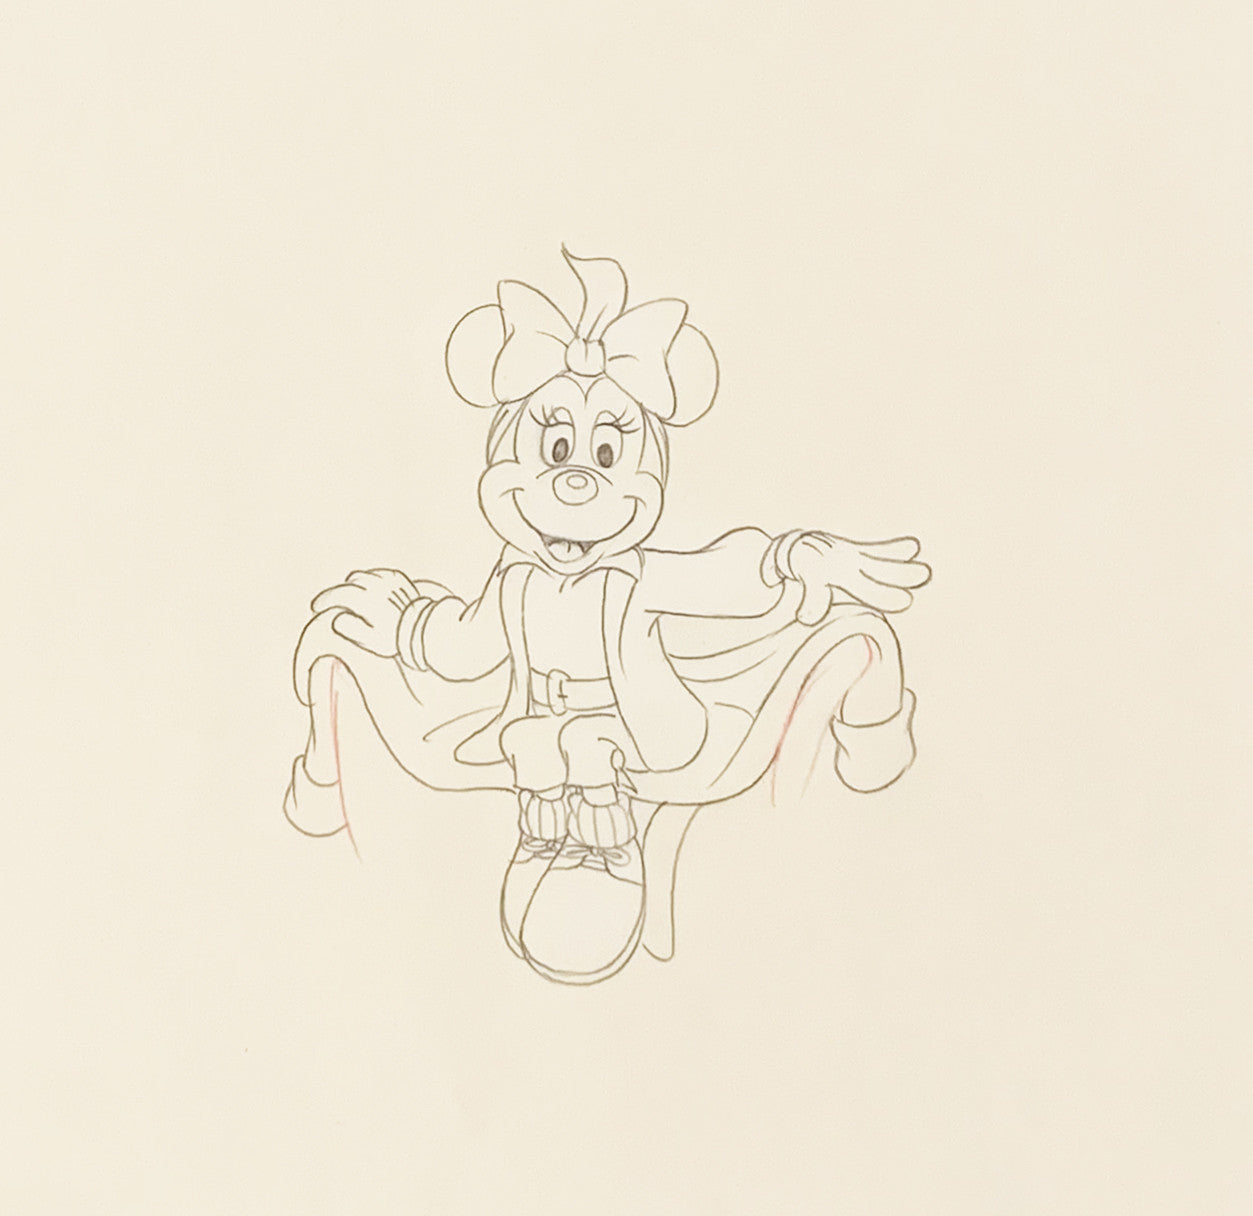 Original Walt Disney Production Drawing featuring Minnie Mouse